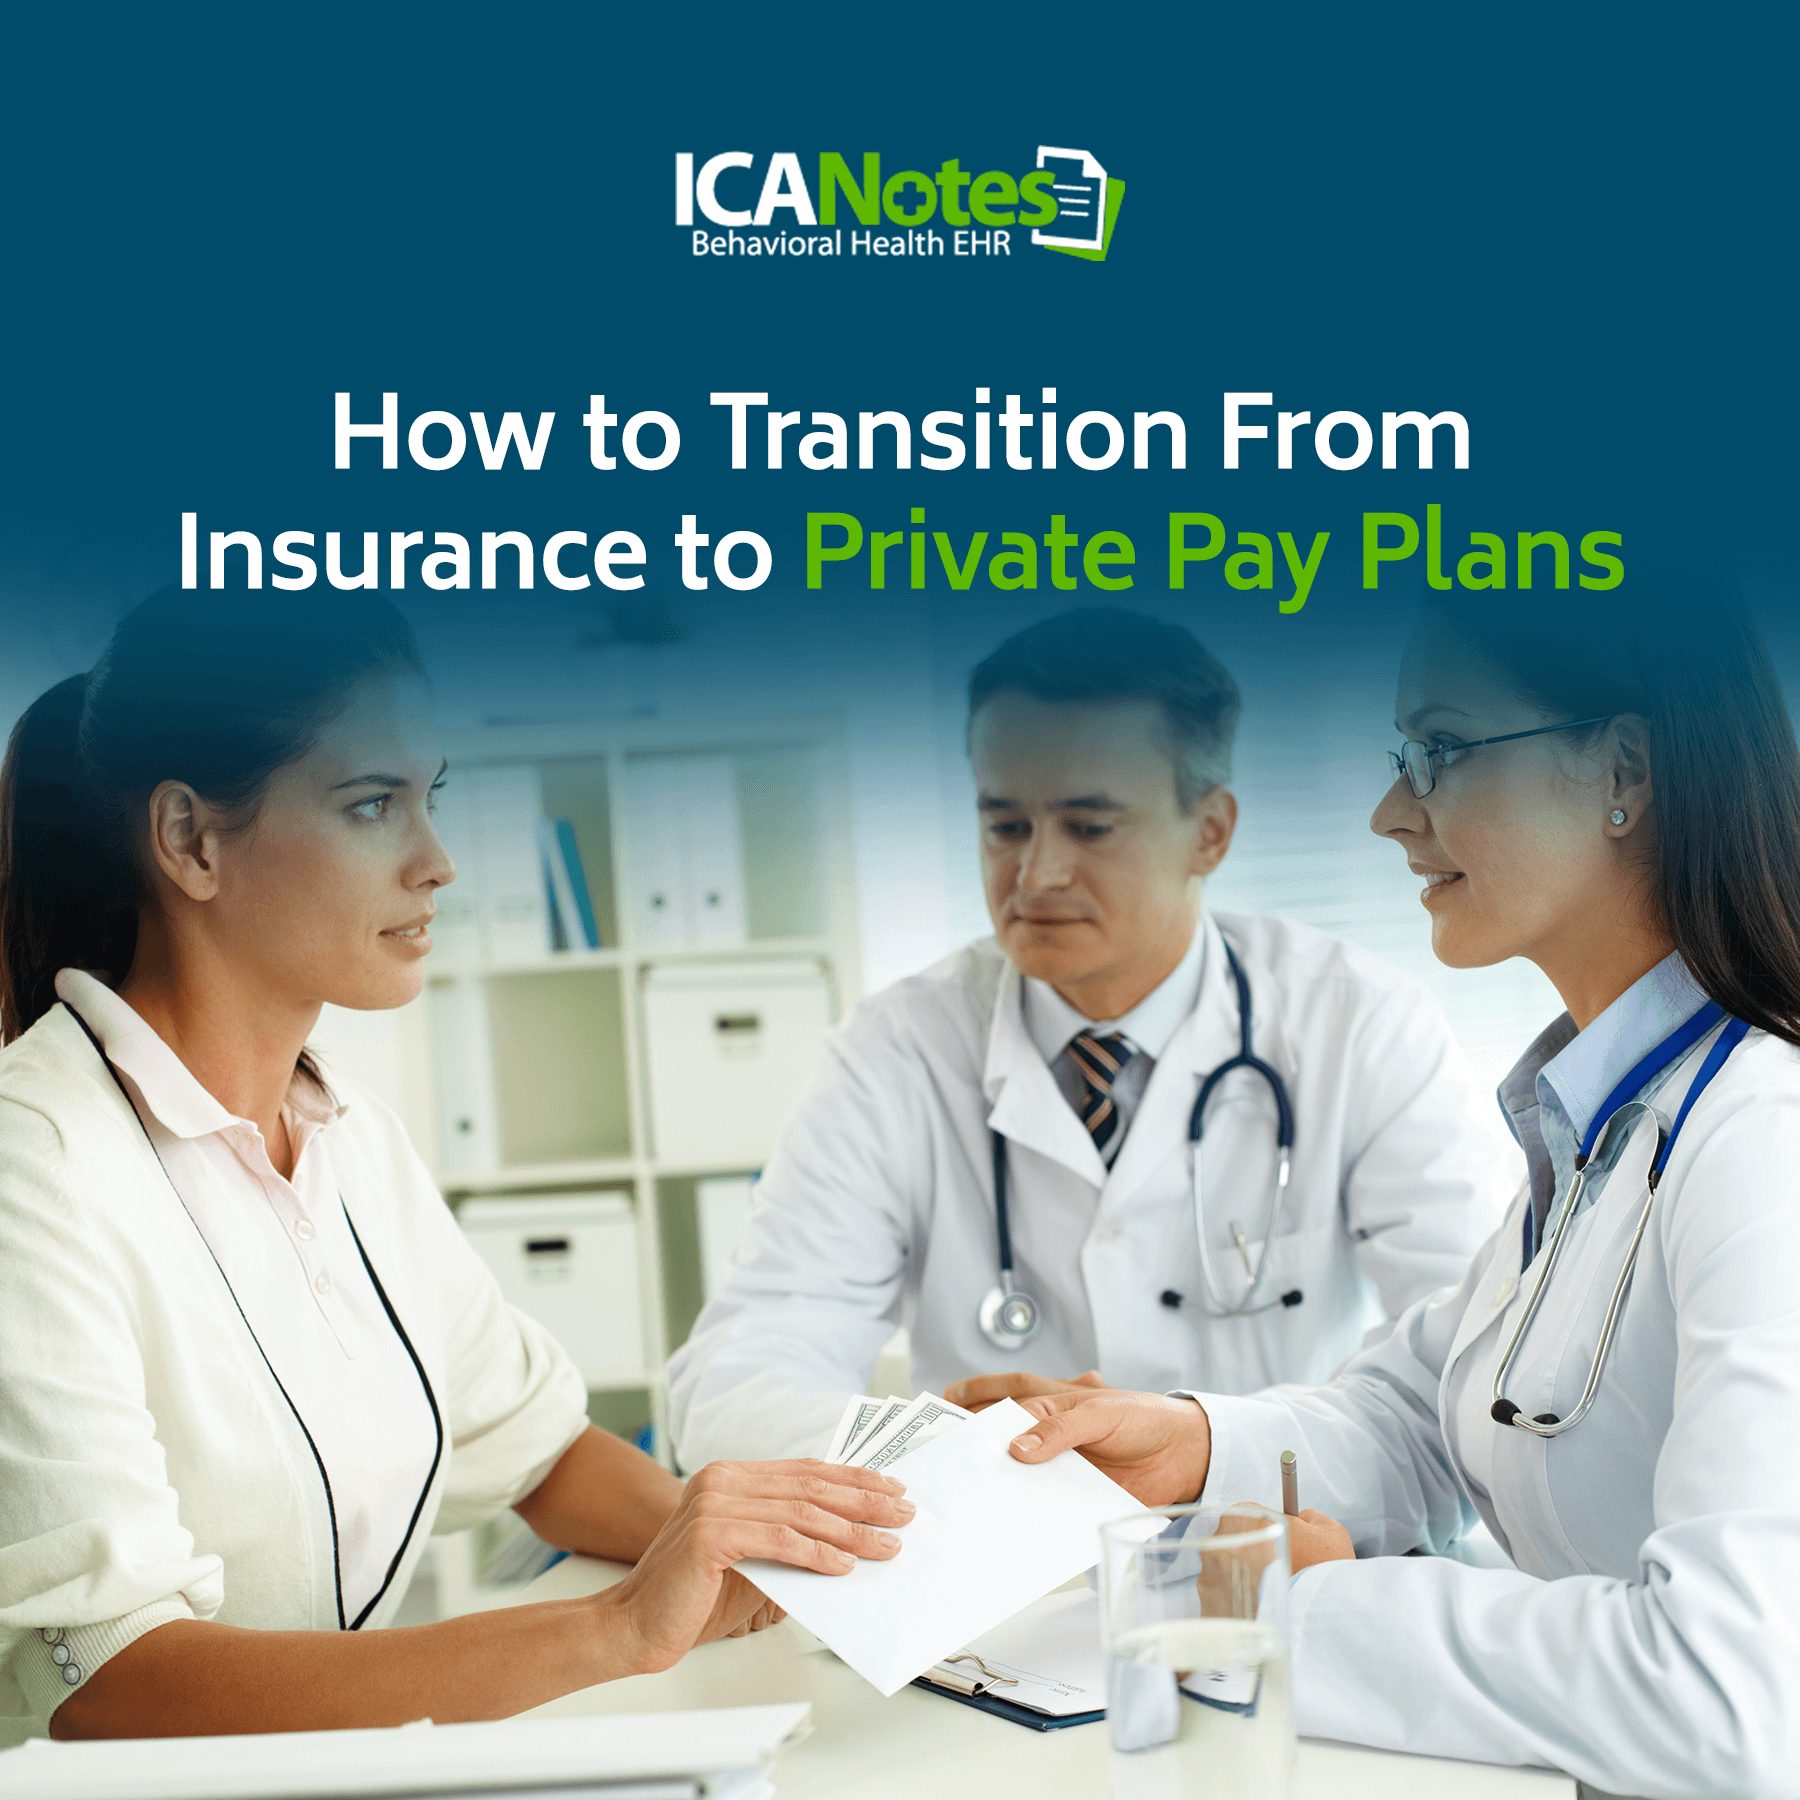 Transition from Insurance to Private Pay